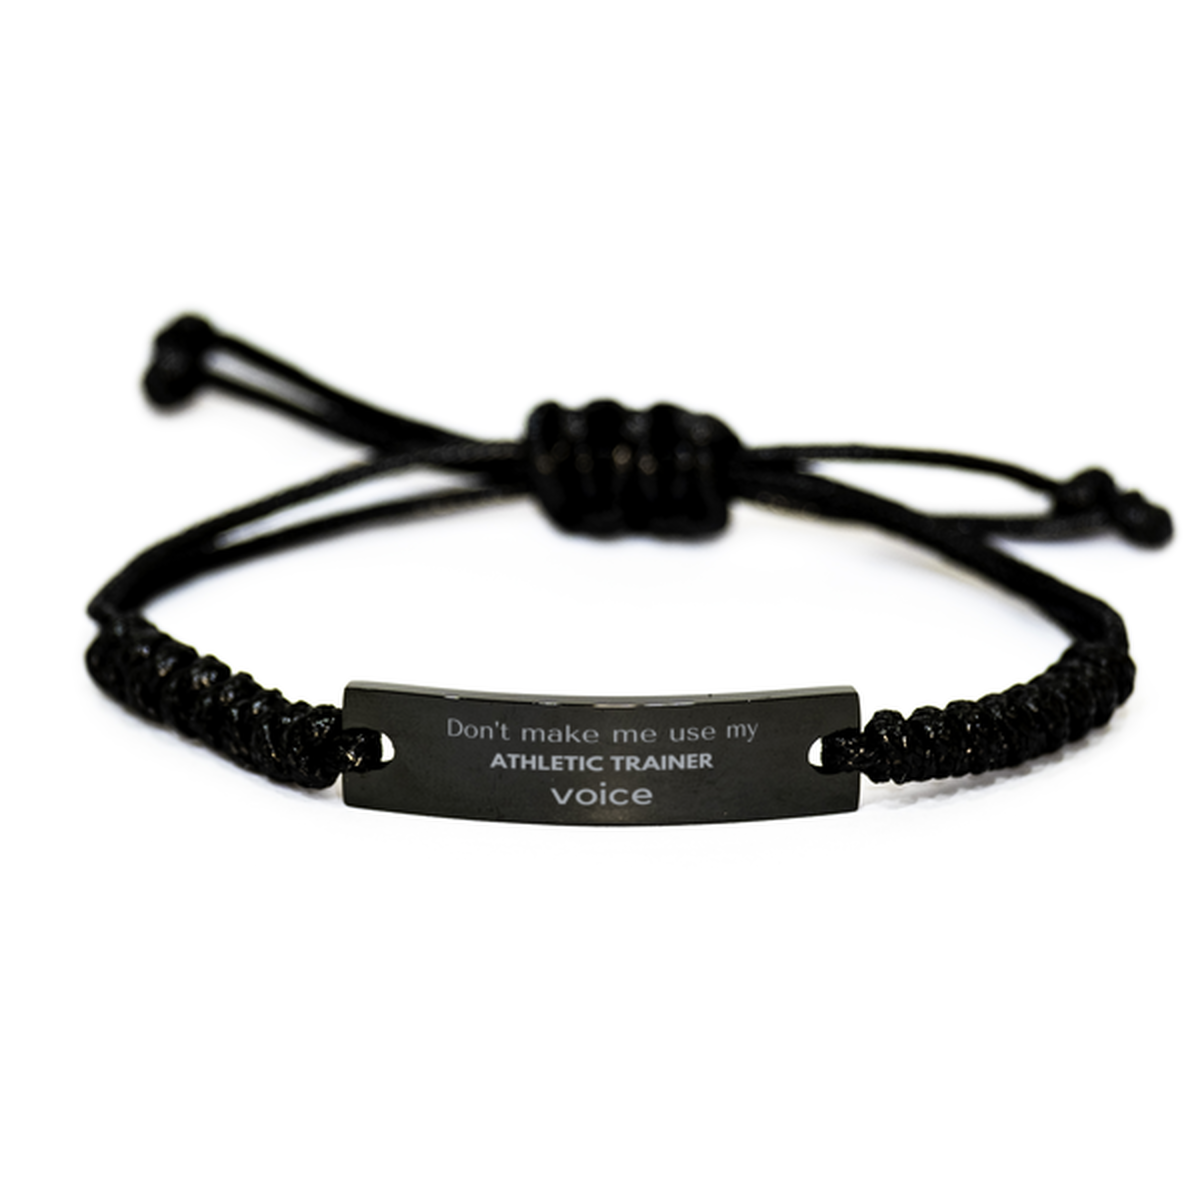 Don't make me use my Athletic Trainer voice, Sarcasm Athletic Trainer Gifts, Christmas Athletic Trainer Black Rope Bracelet Birthday Unique Gifts For Athletic Trainer Coworkers, Men, Women, Colleague, Friends